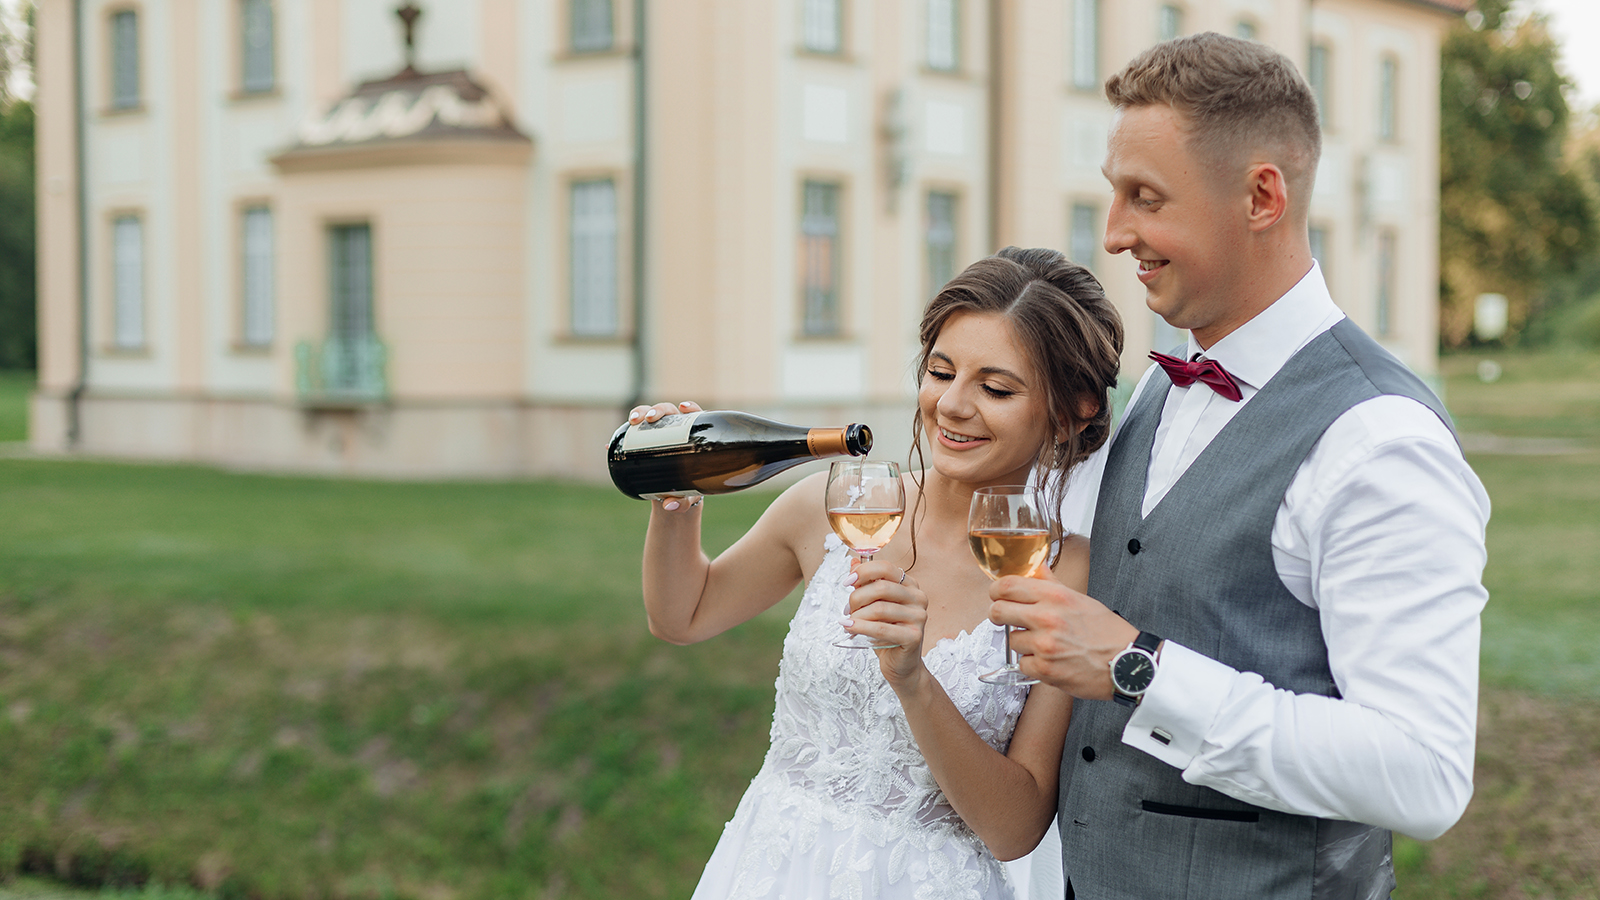 Cheerful married couple of bride in wedding dress and groom in suit pouring and drinking bubbly champagne together, having fun on wedding day in front of new house. Mortgage loan for young family